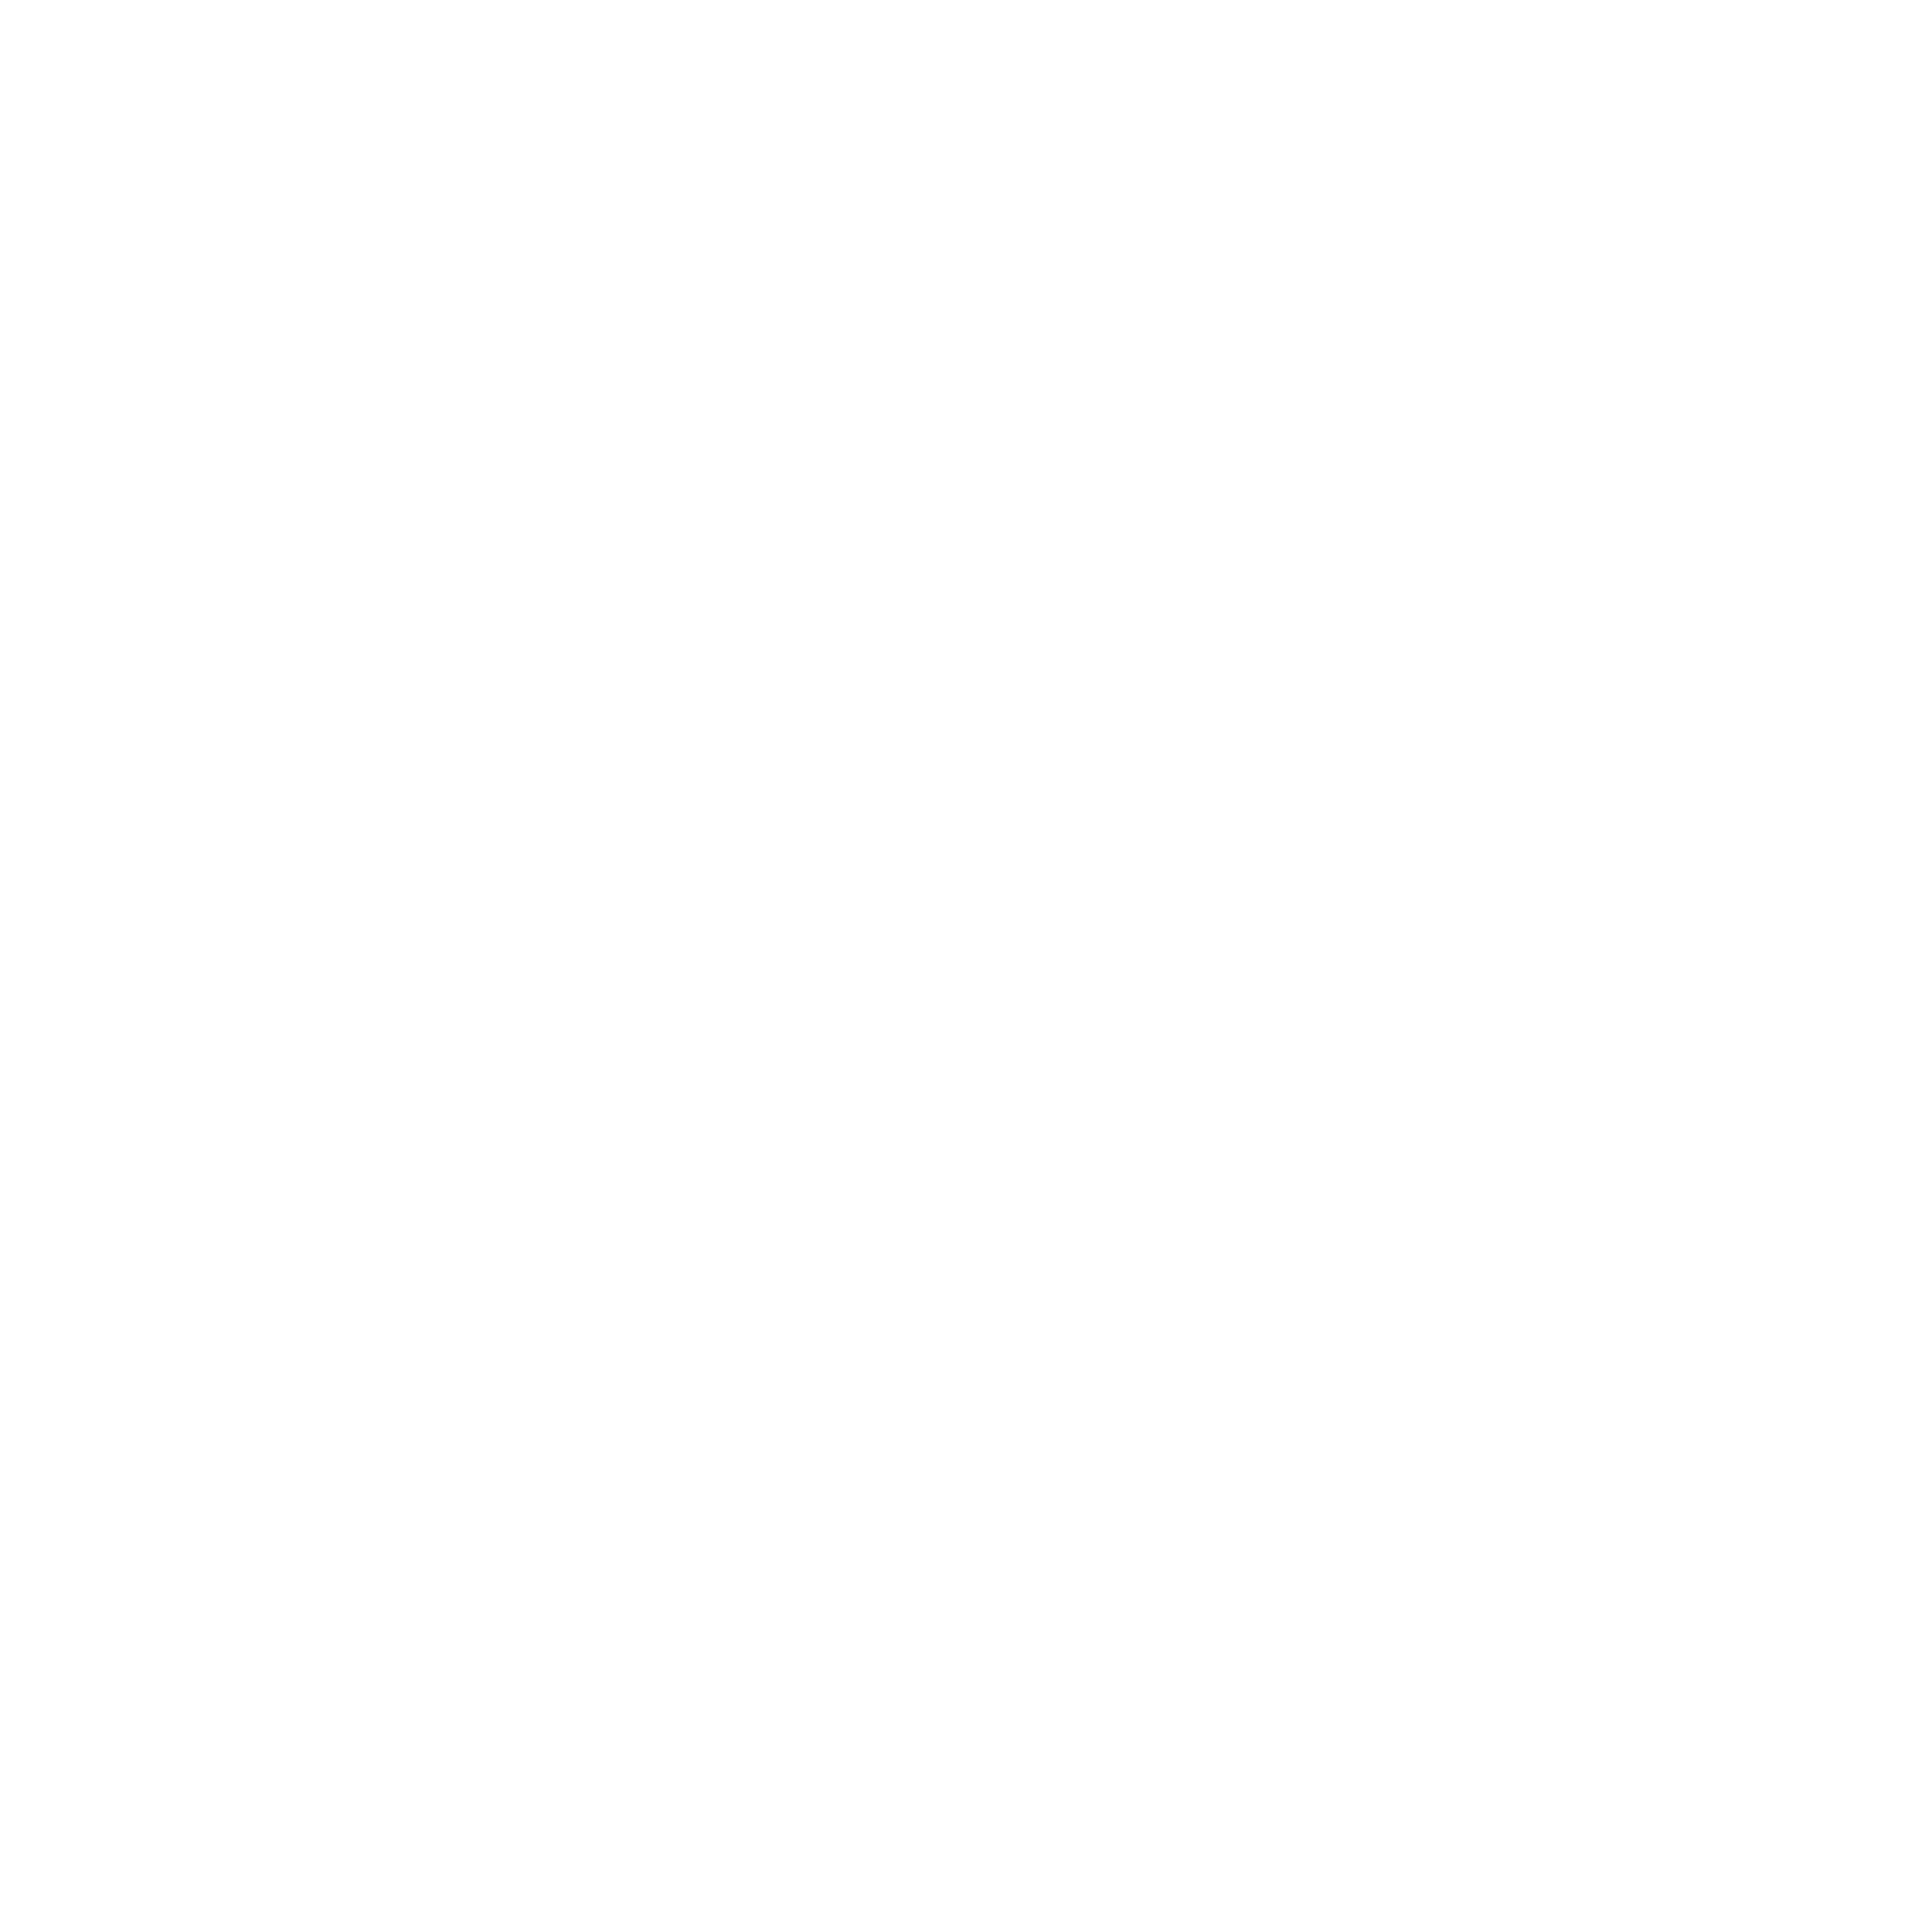 ResinLapse / Make resin timelapse videos with your DSLR camera!